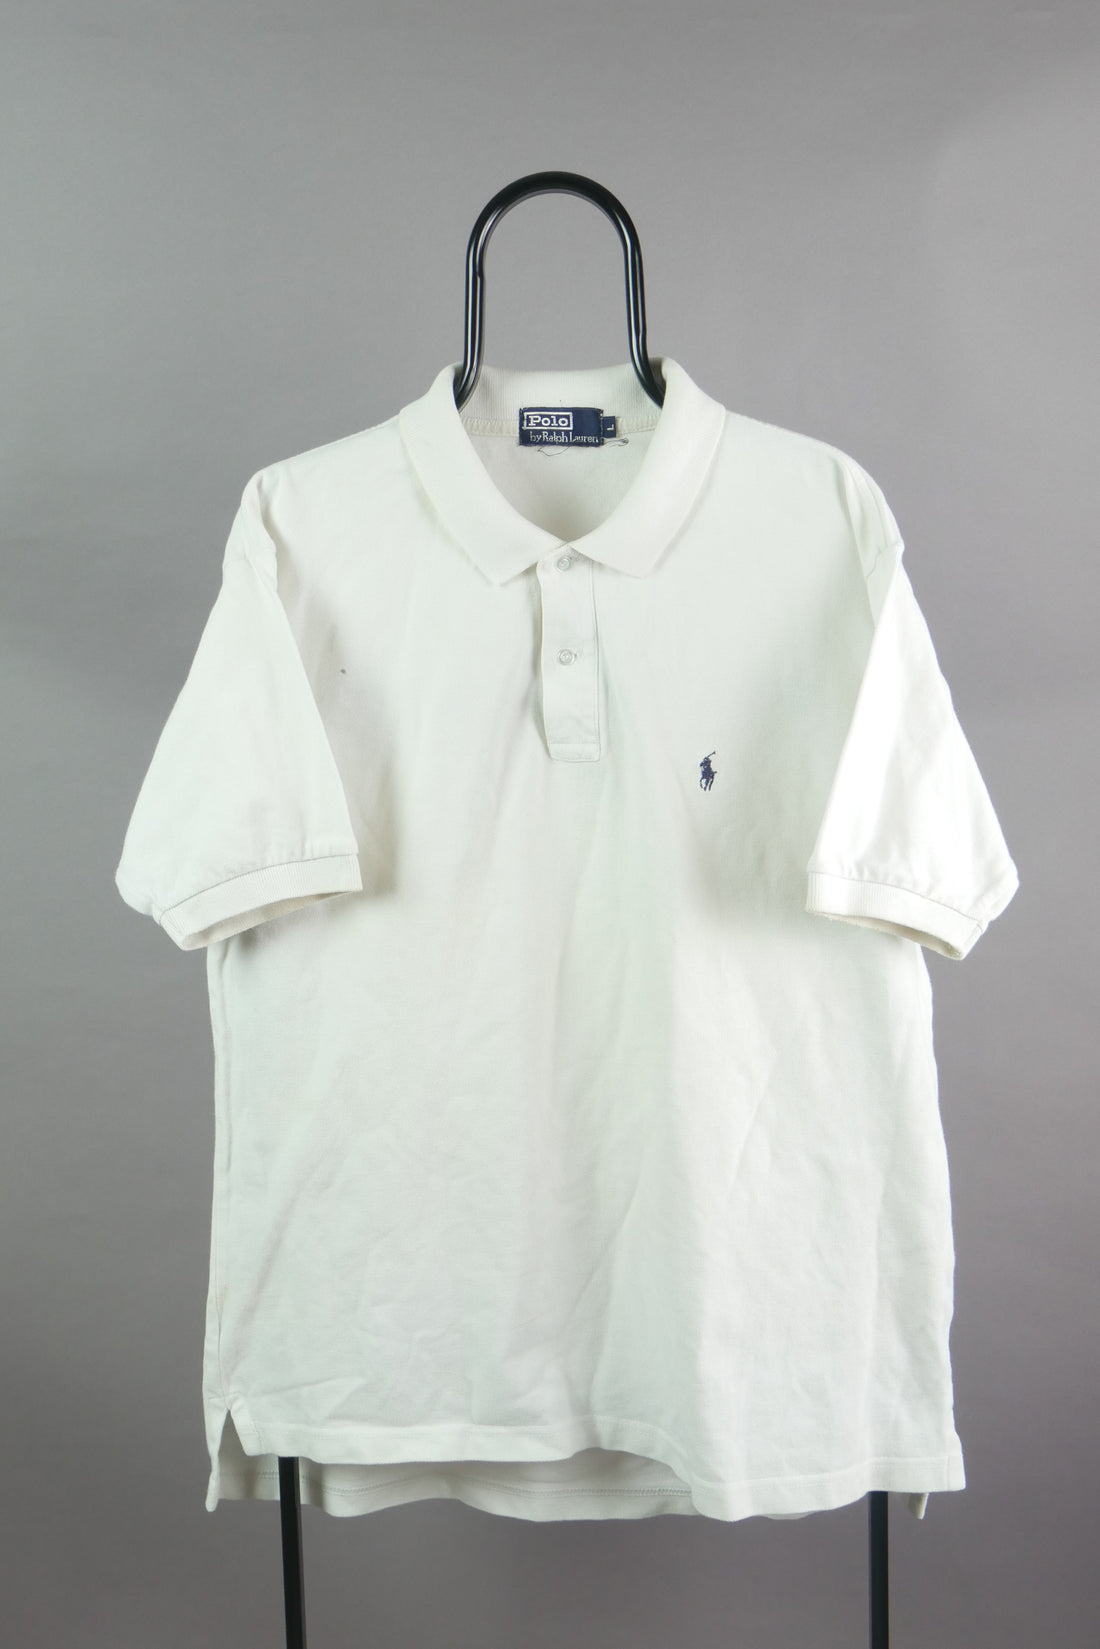 The Polo Ralph Lauren Embroidered Logo Polo (L)